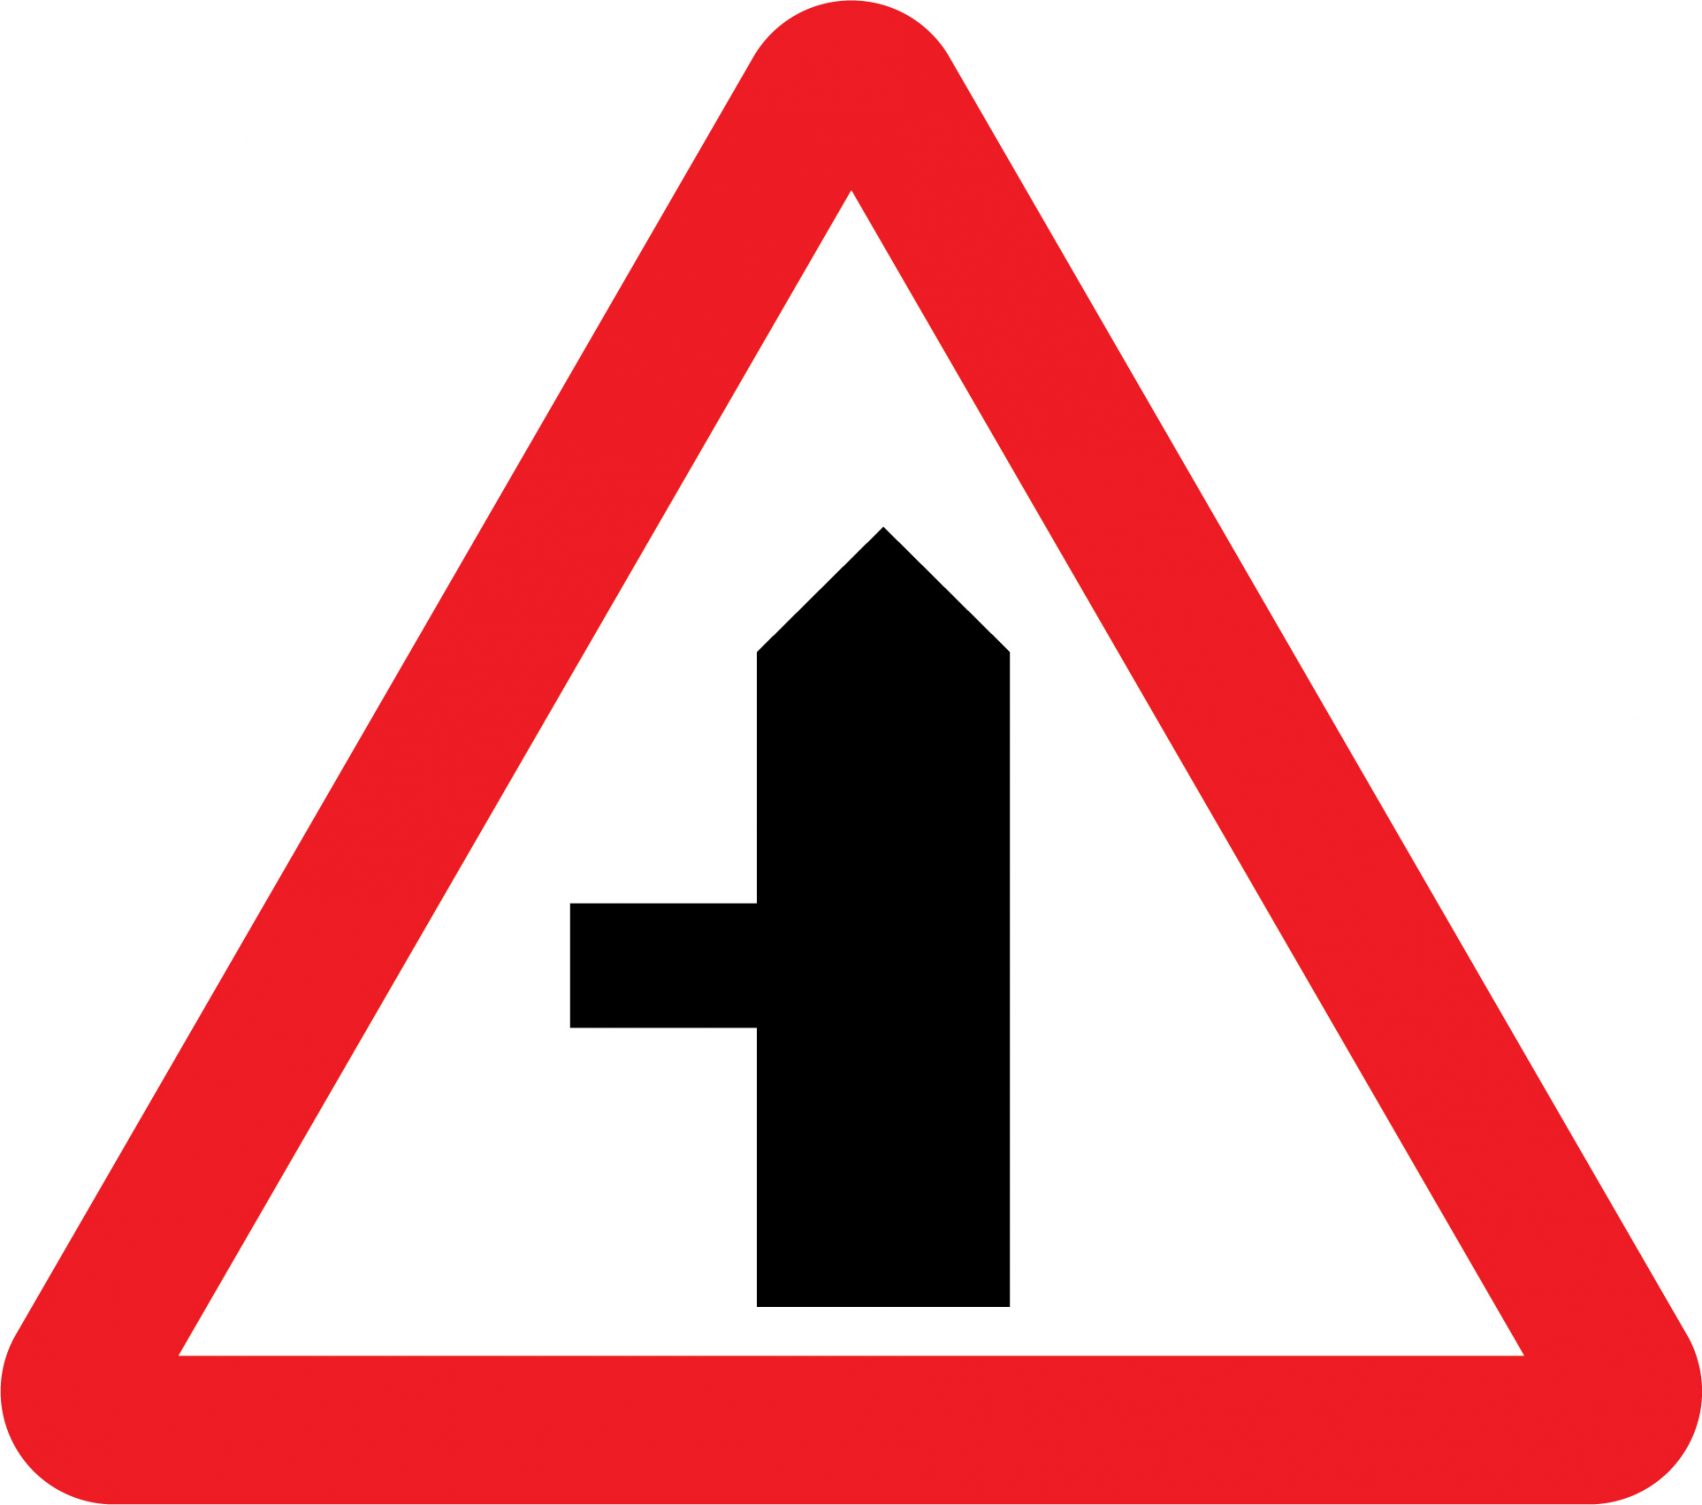 Road traffic Turn left ahead safety sign 